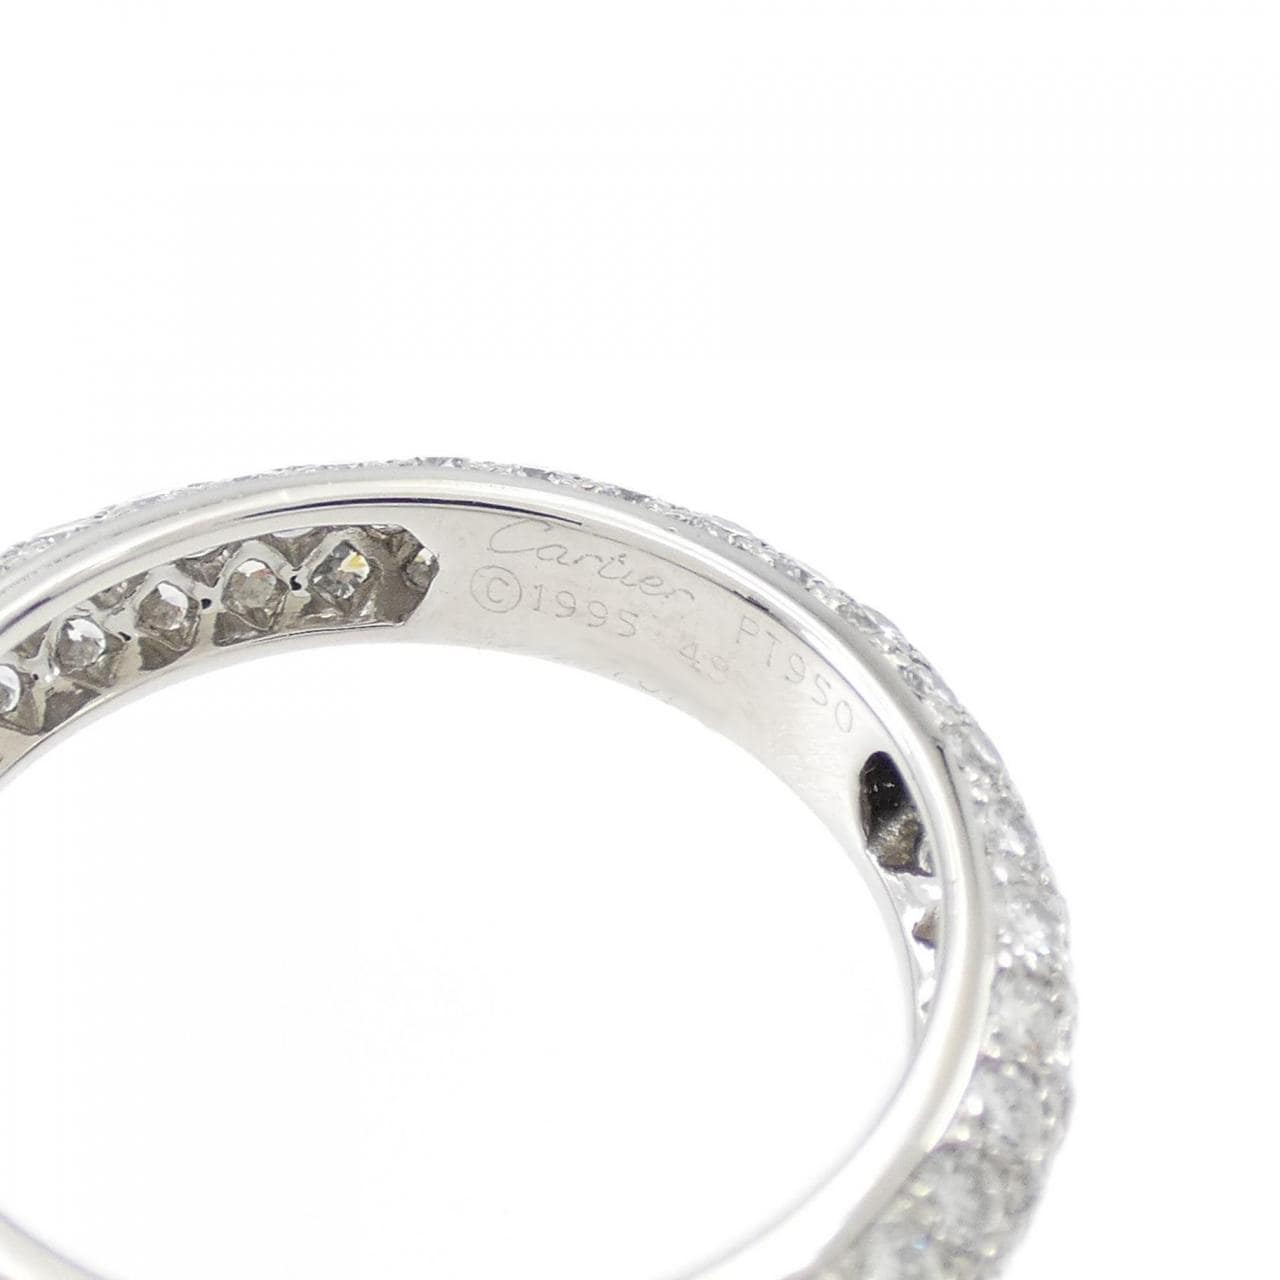 Cartier pave ring